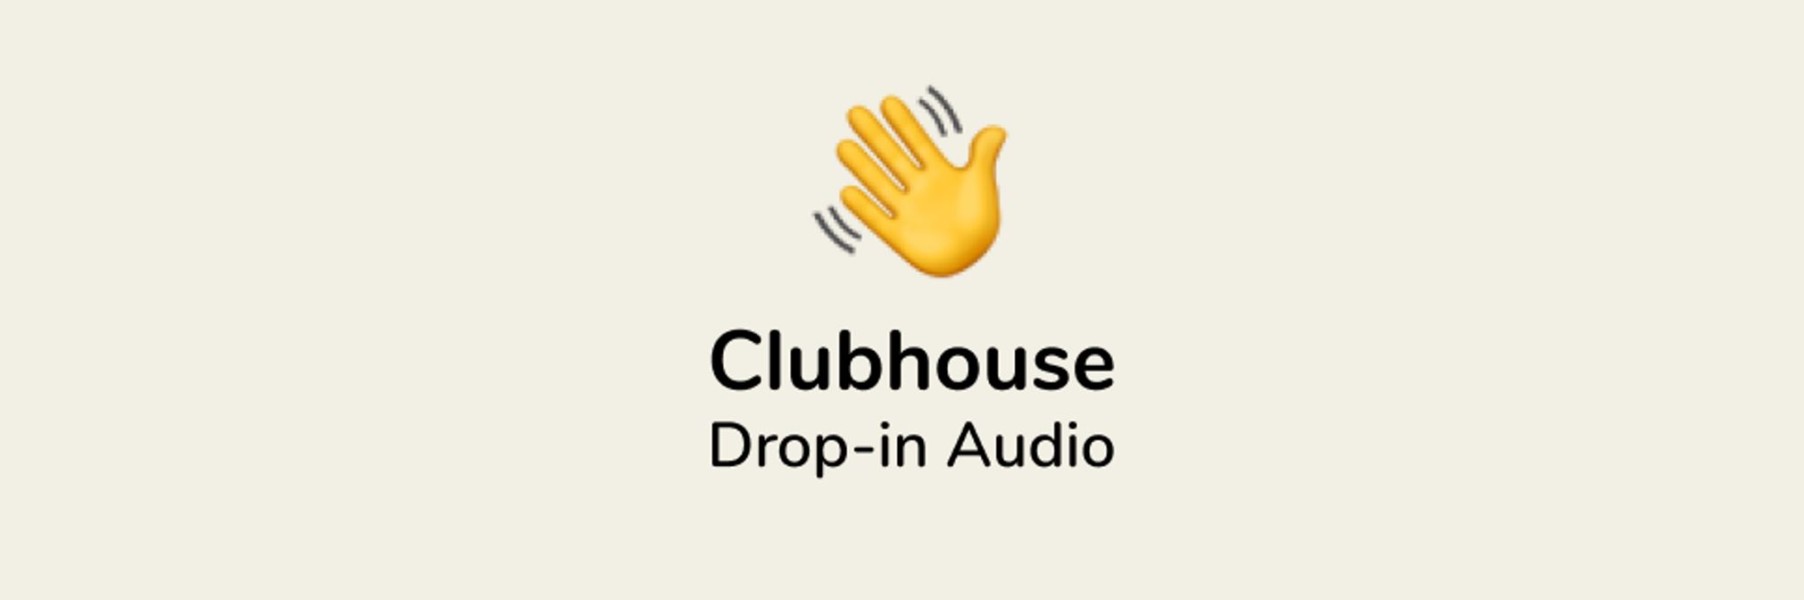 I am inviting you to Clubhouse!